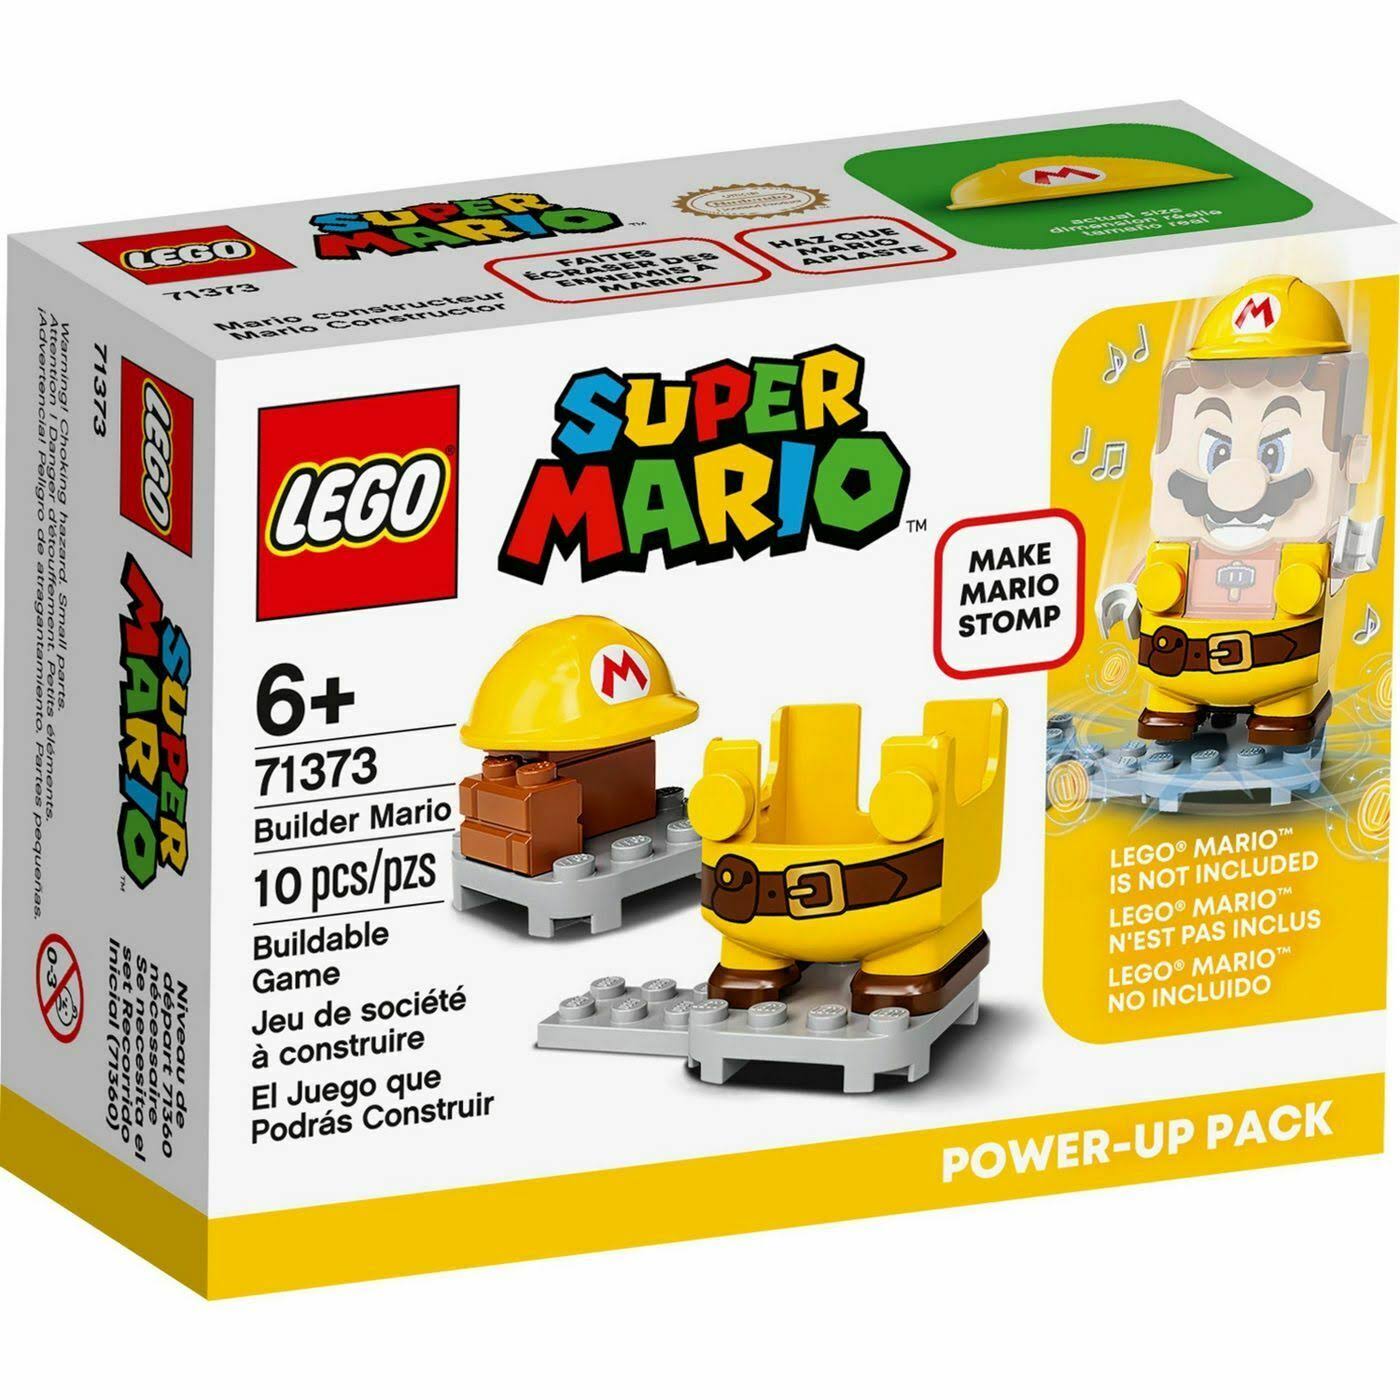 Lego 71373 Super Mario Builder Mario Power-Up Pack New with Box